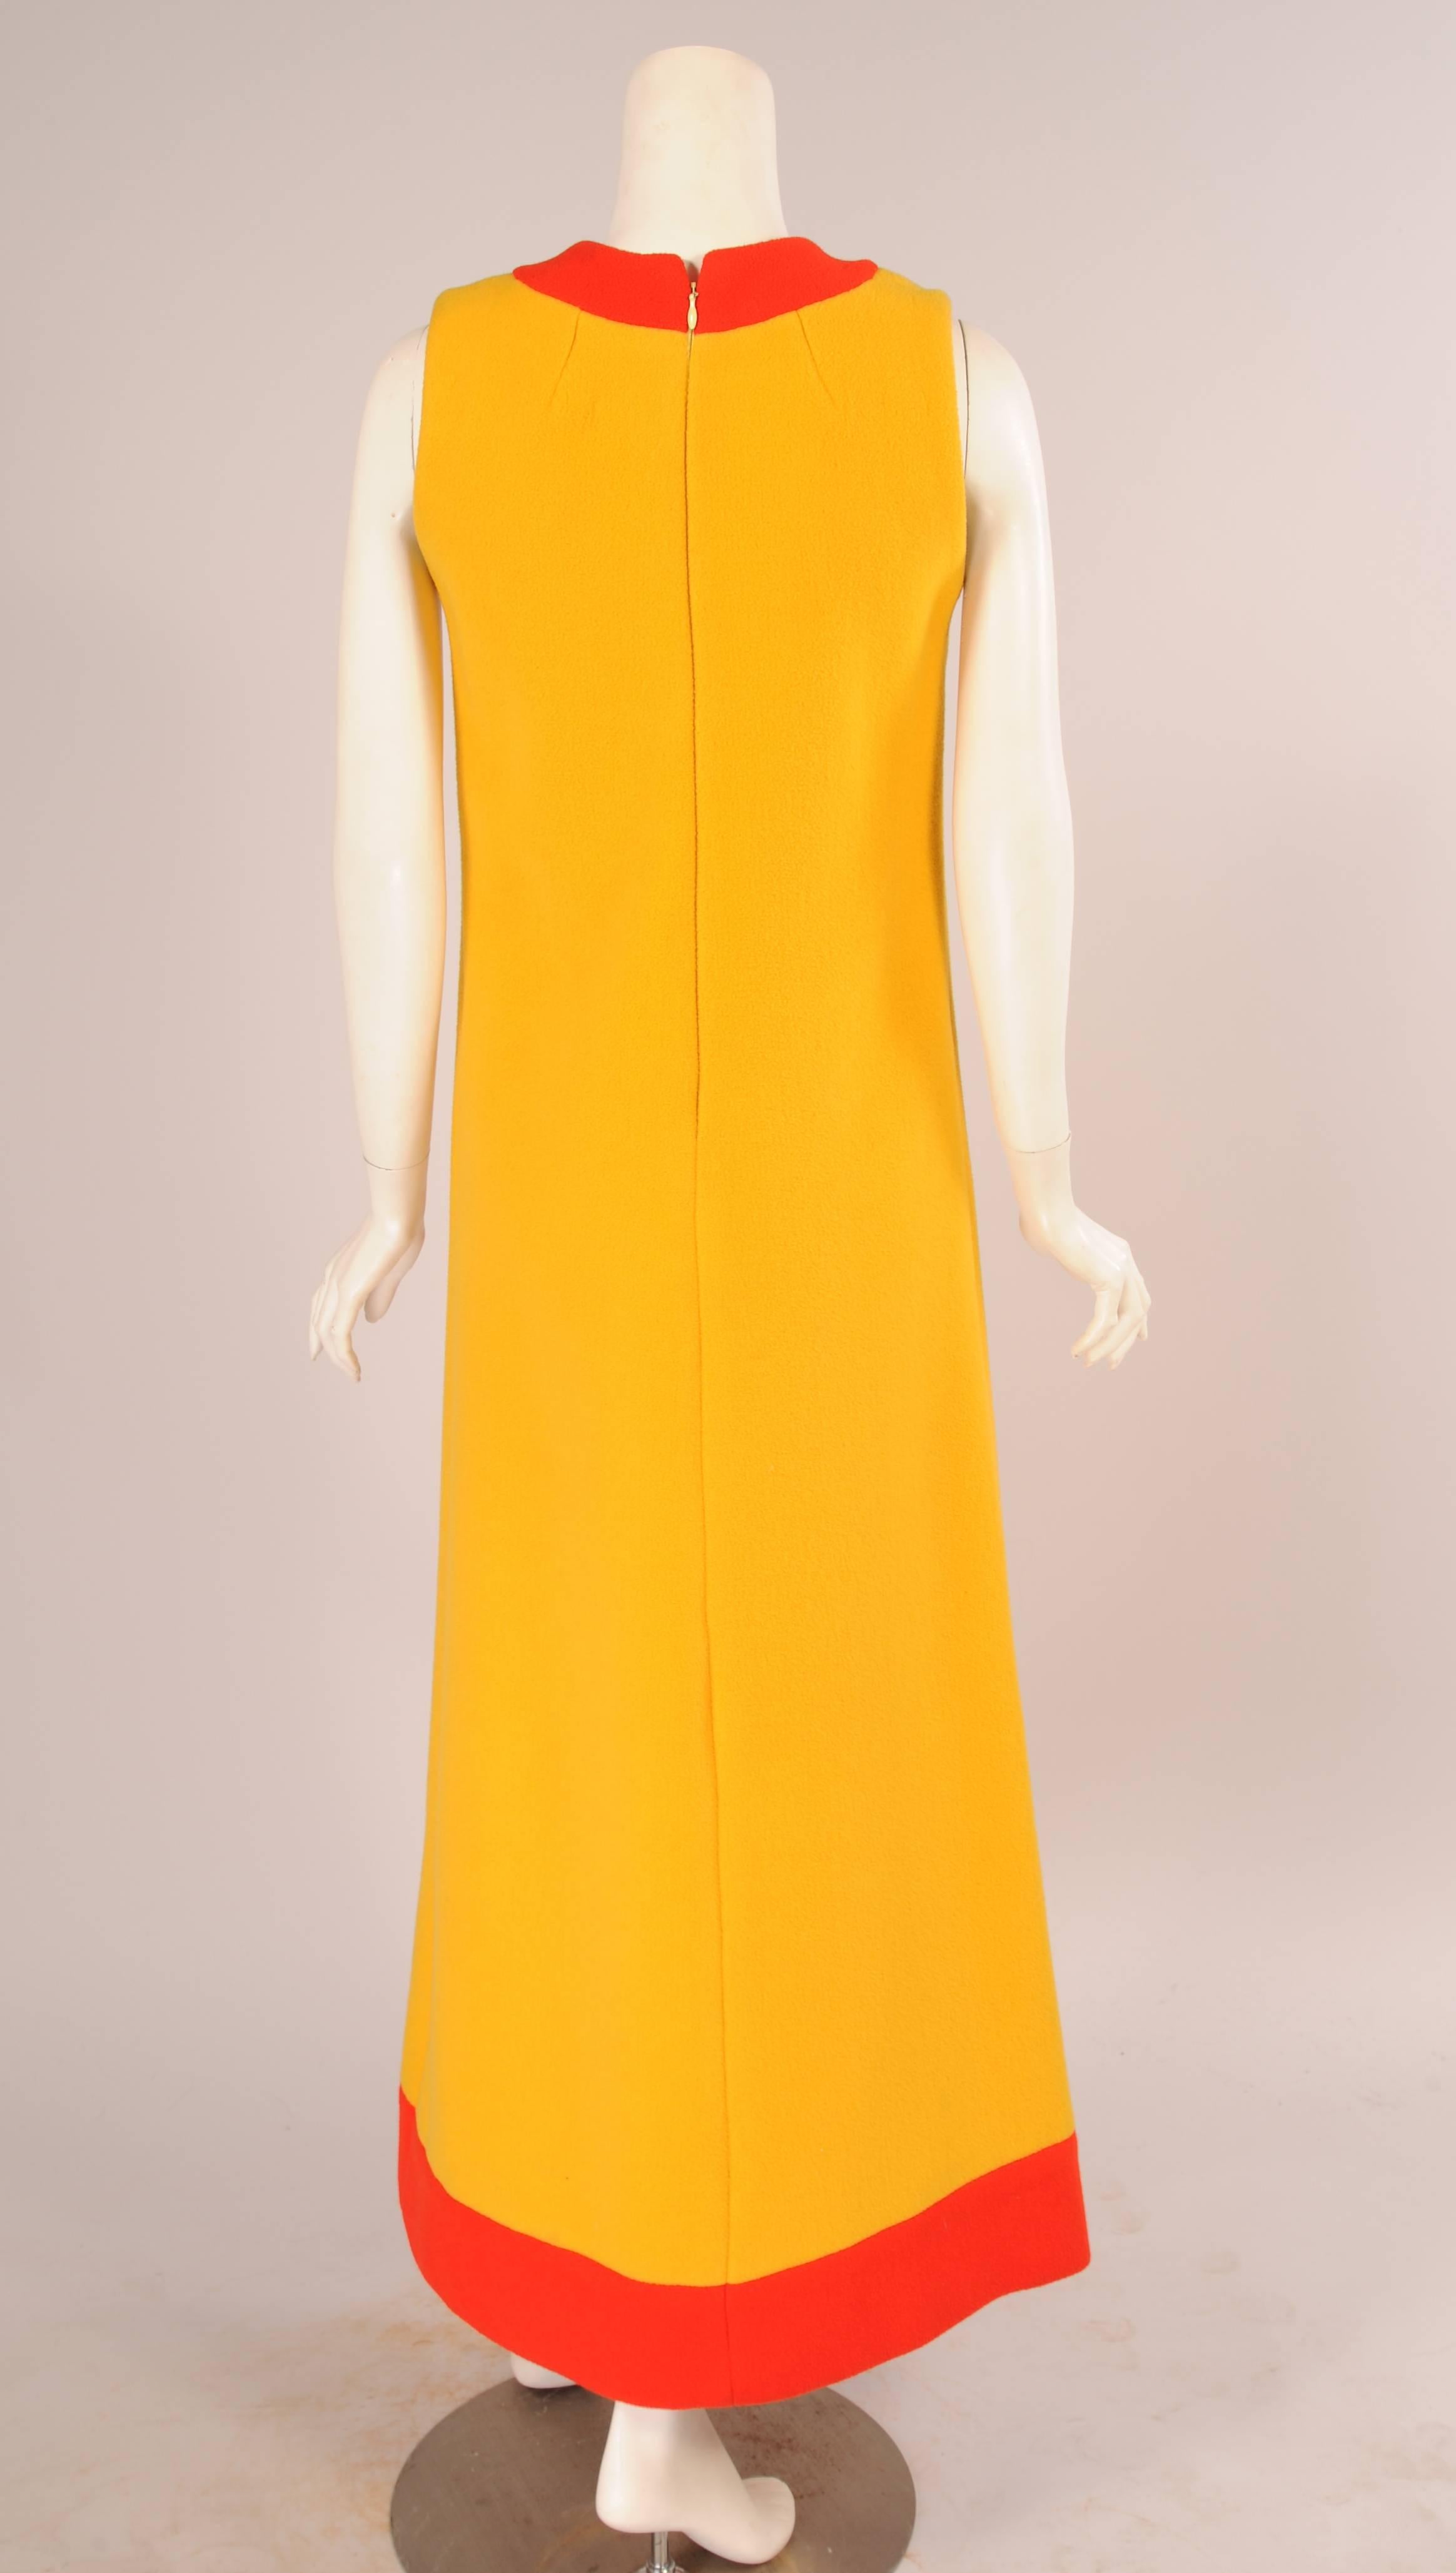 Women's Bright Yellow Maxi Dress with Bright Red Keyhole Neckline, 1960s 